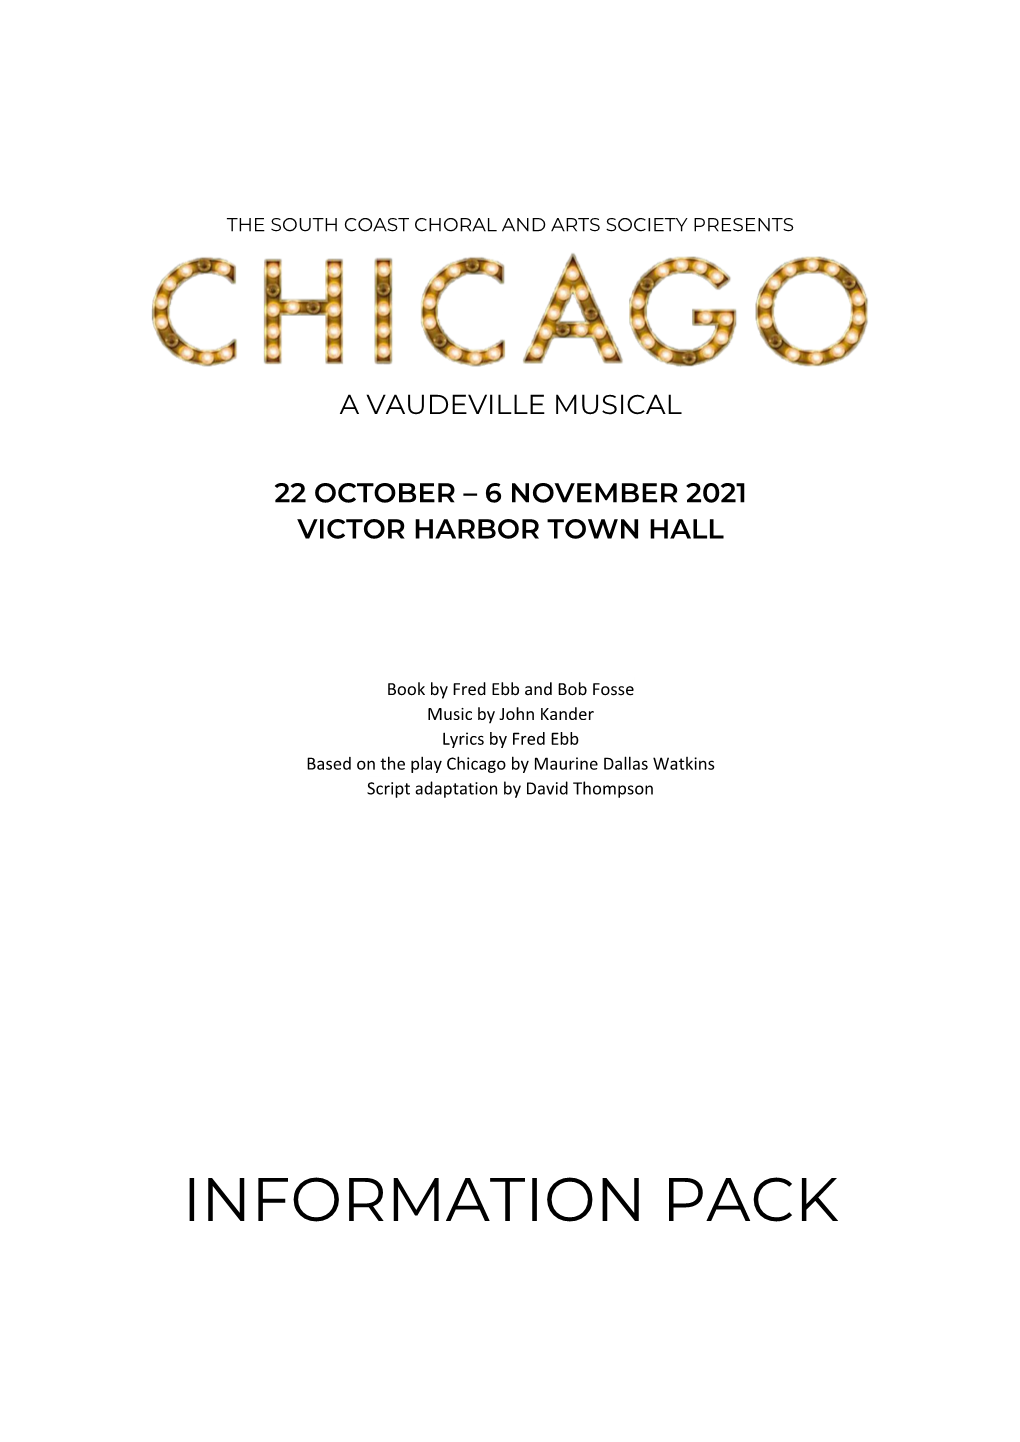 INFORMATION PACK Thanks for Grabbing a Copy of Our Information Pack for Chicago